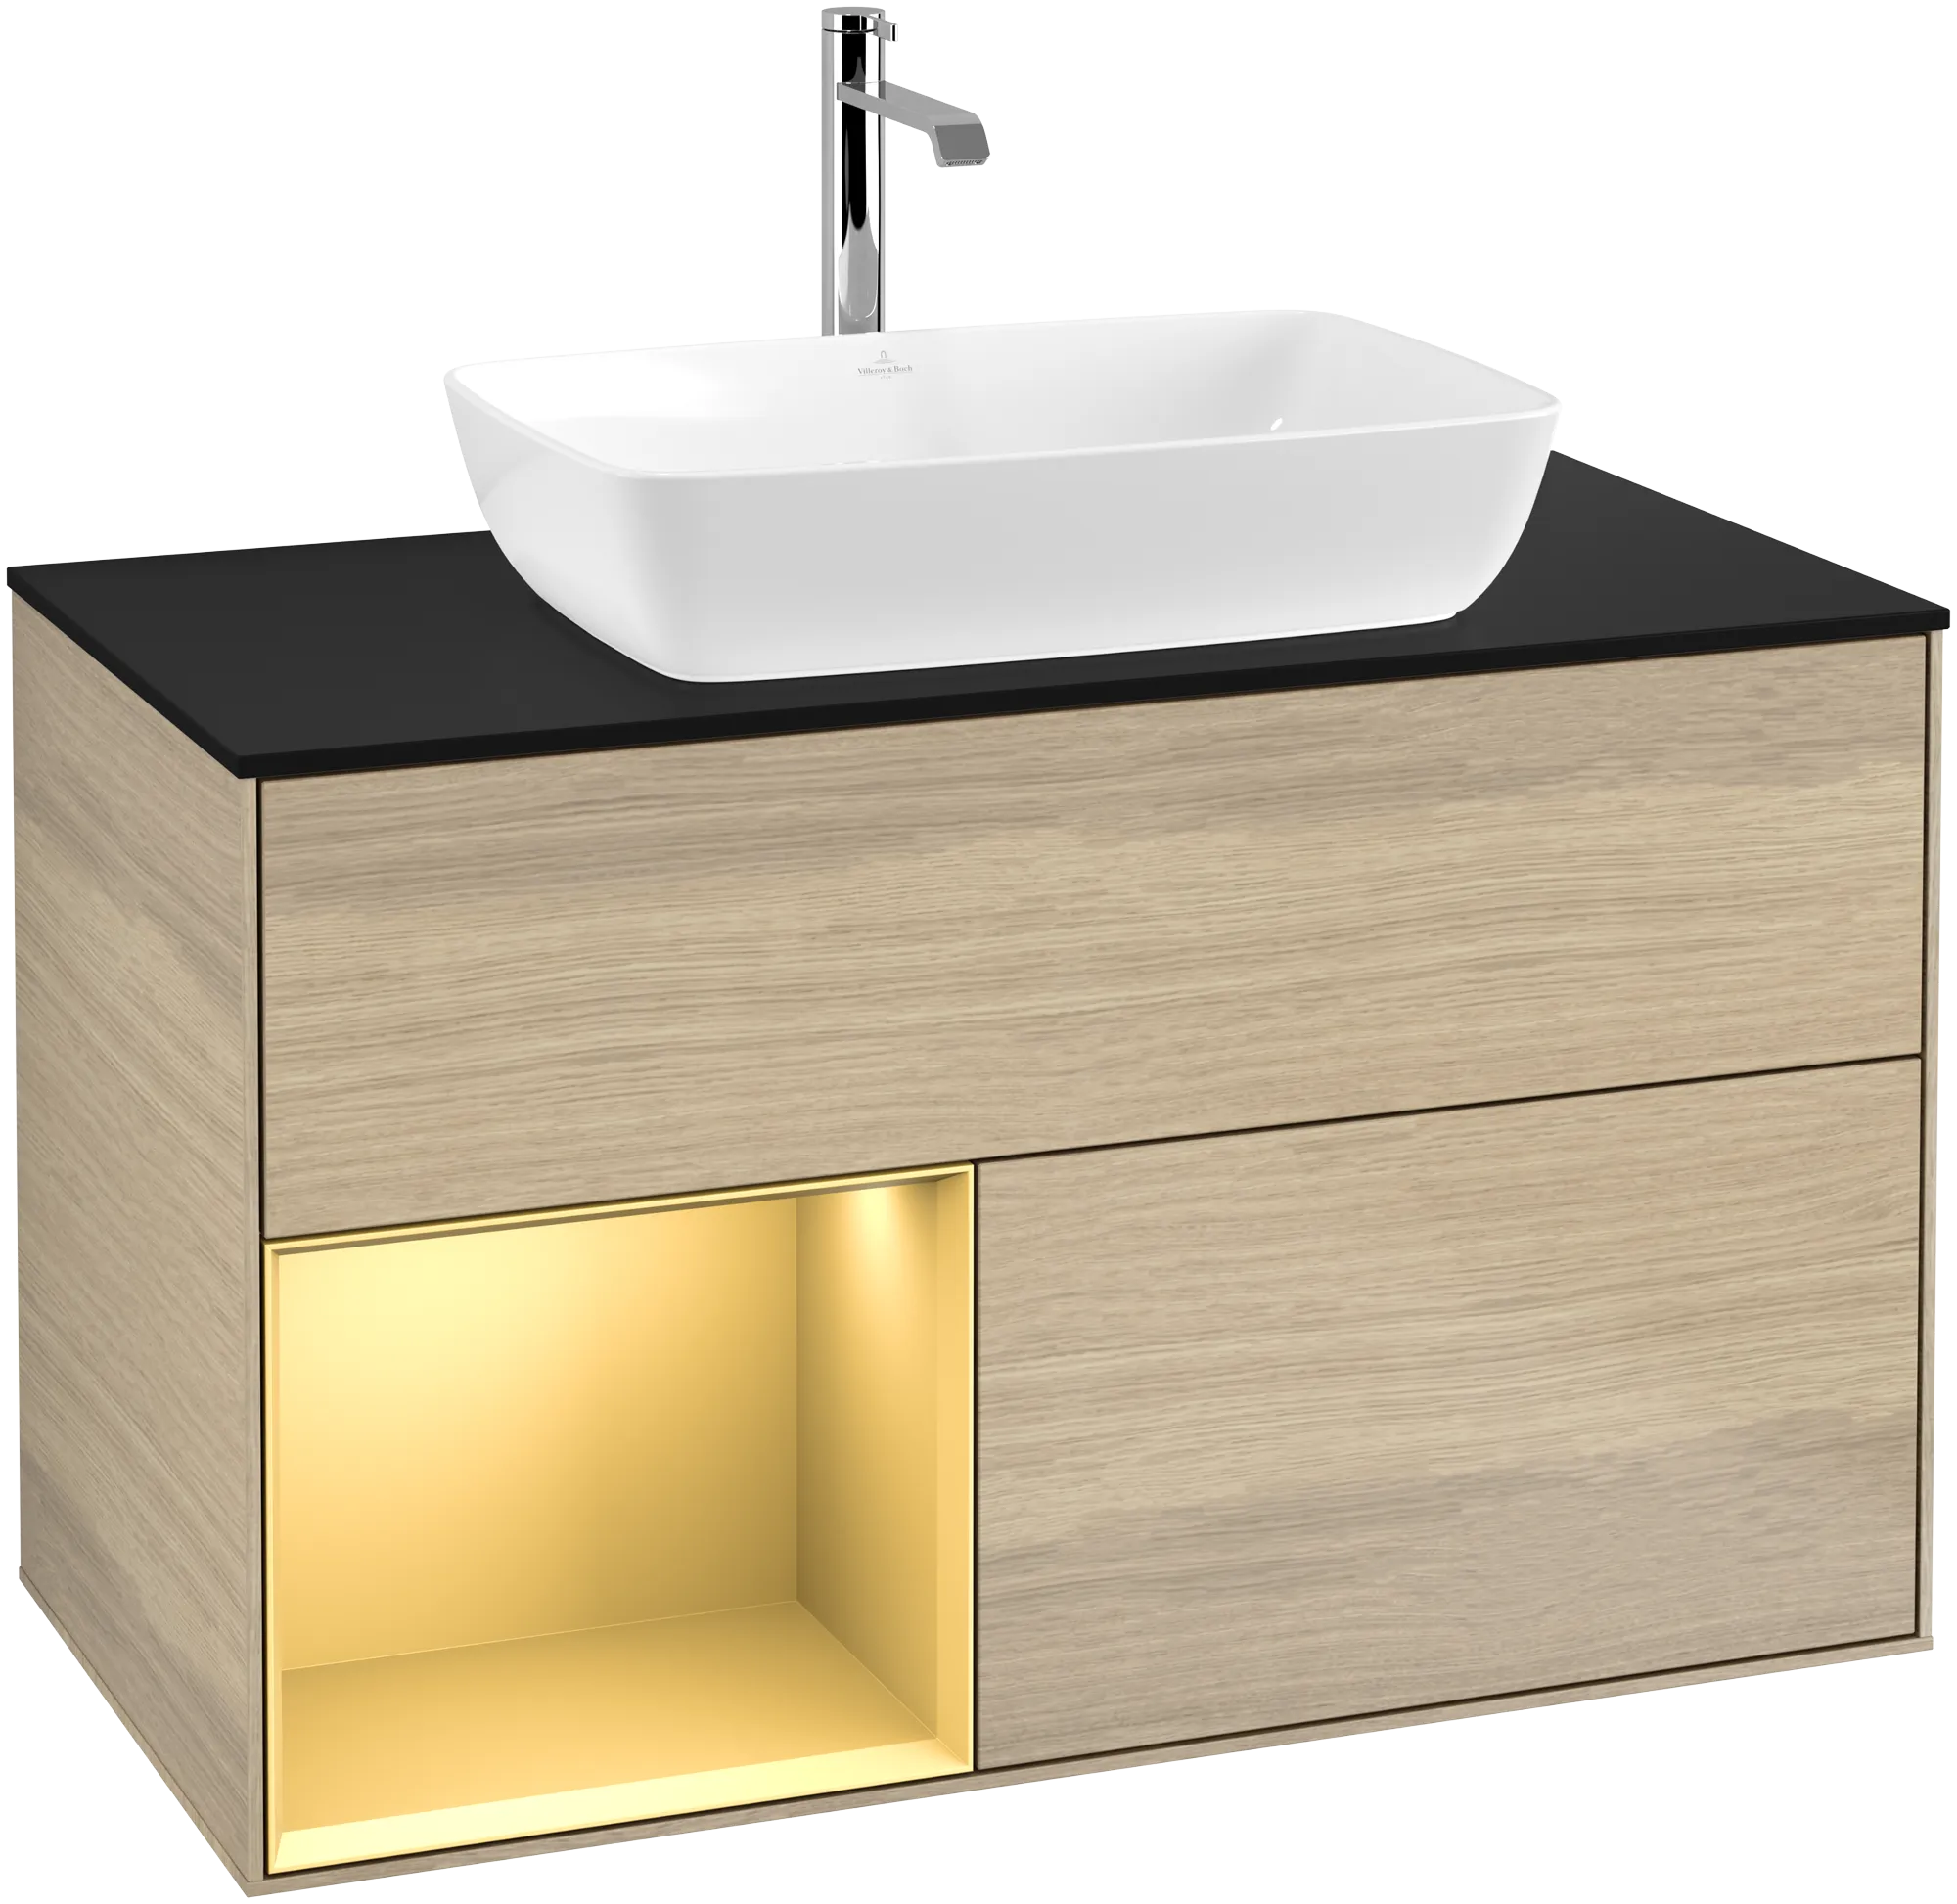 Picture of VILLEROY BOCH Finion Vanity unit, with lighting, 2 pull-out compartments, 1000 x 603 x 501 mm, Oak Veneer / Gold Matt Lacquer / Glass Black Matt #G772HFPC